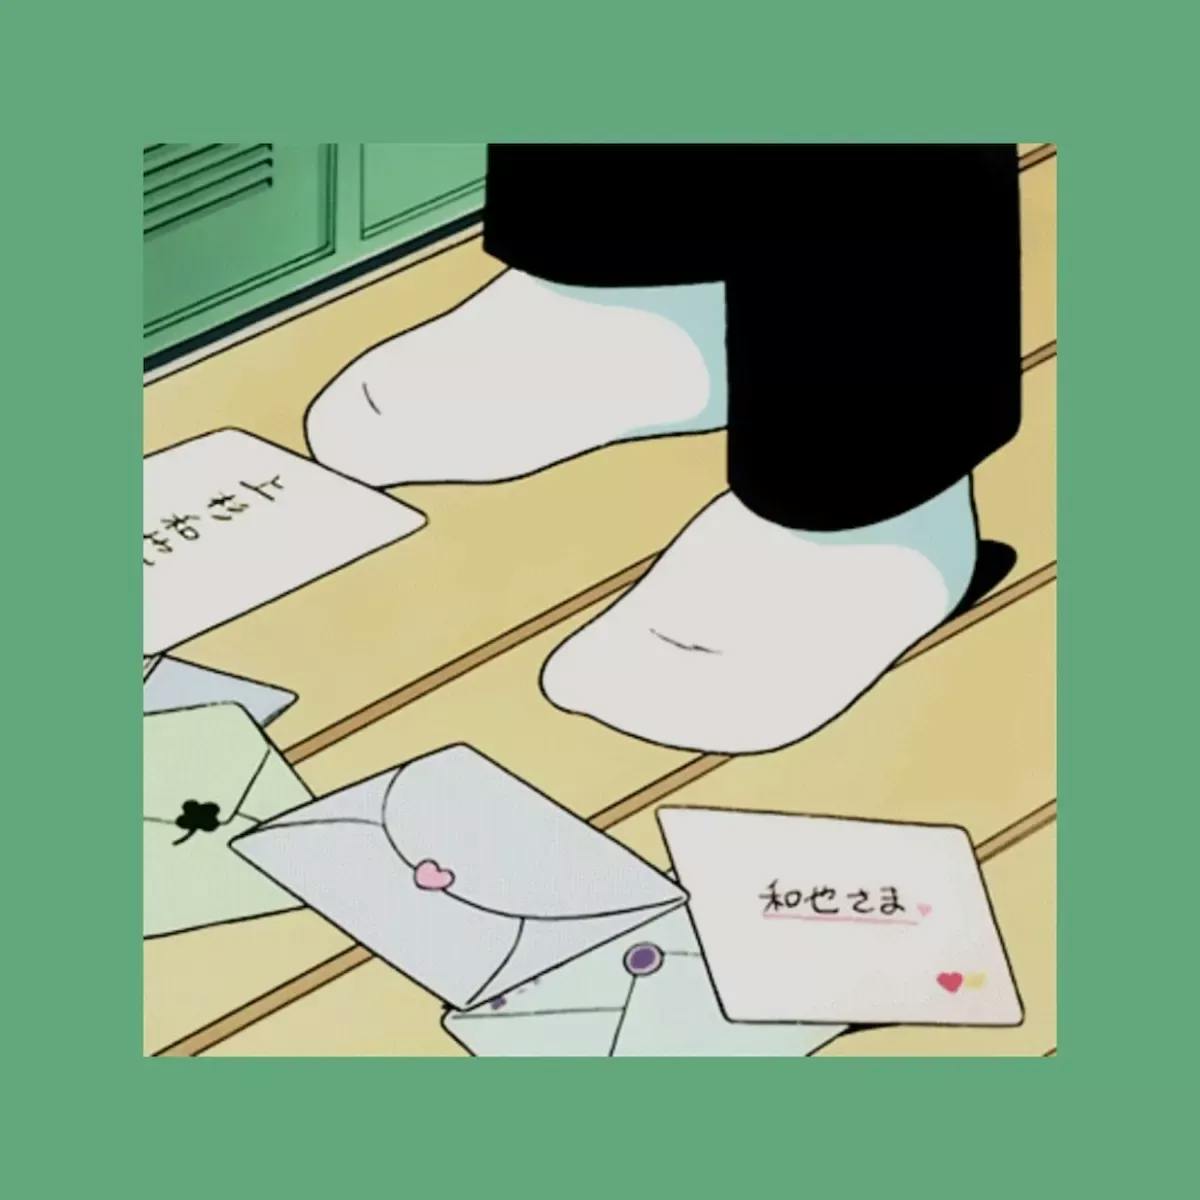 close up of feet on the ground with socks and cards surrounding the feet